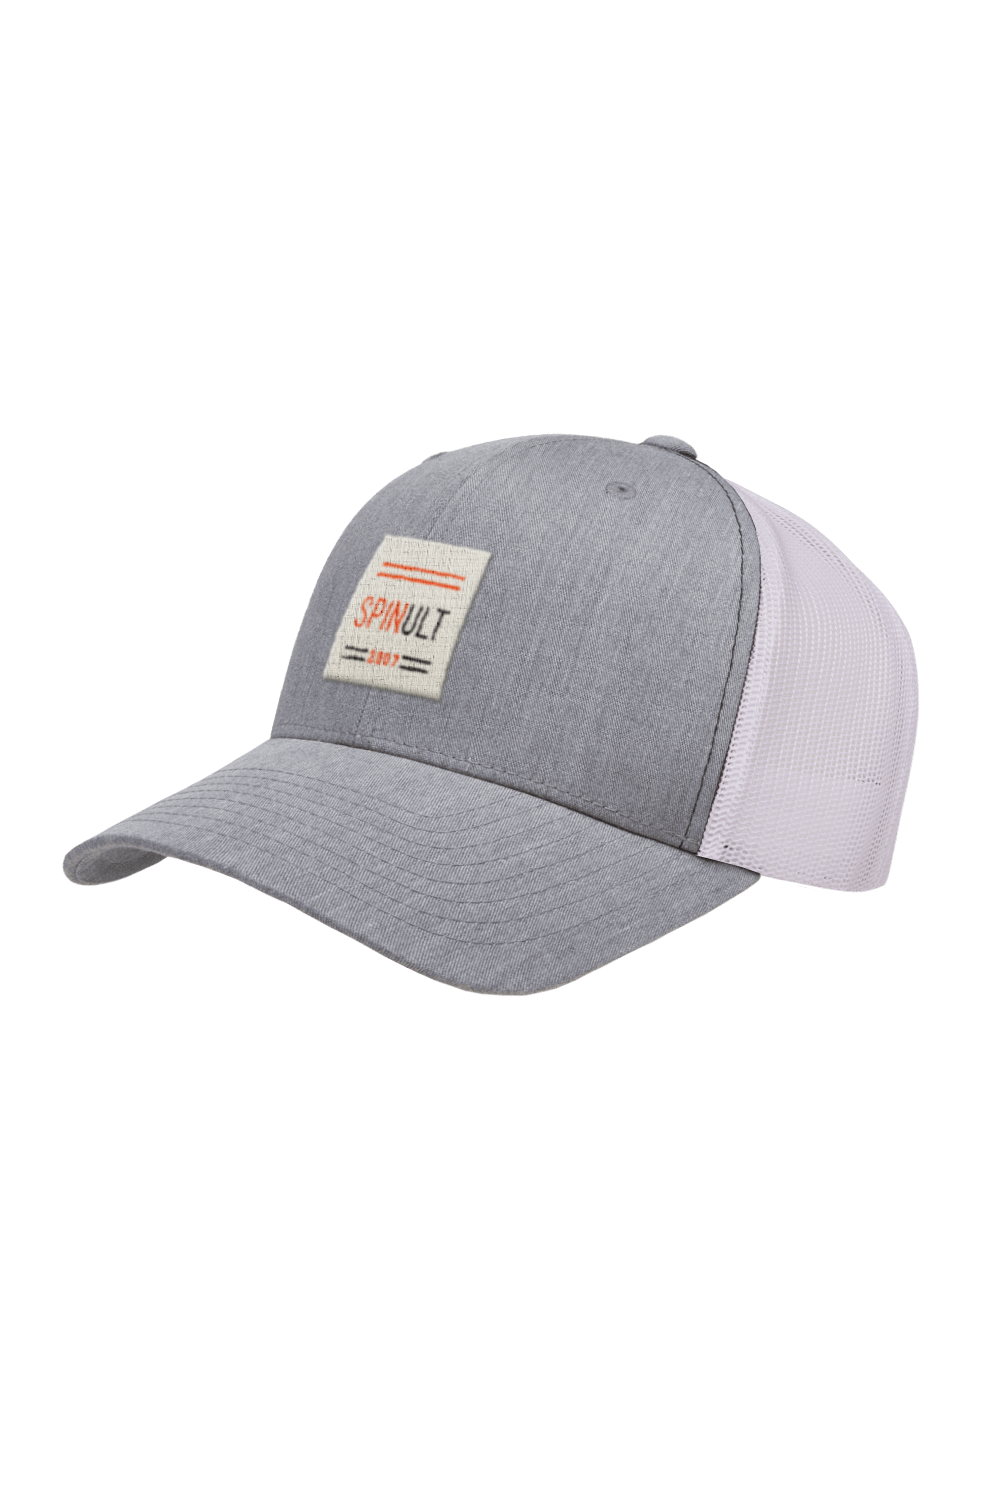 Don't Be Square Trucker Hat